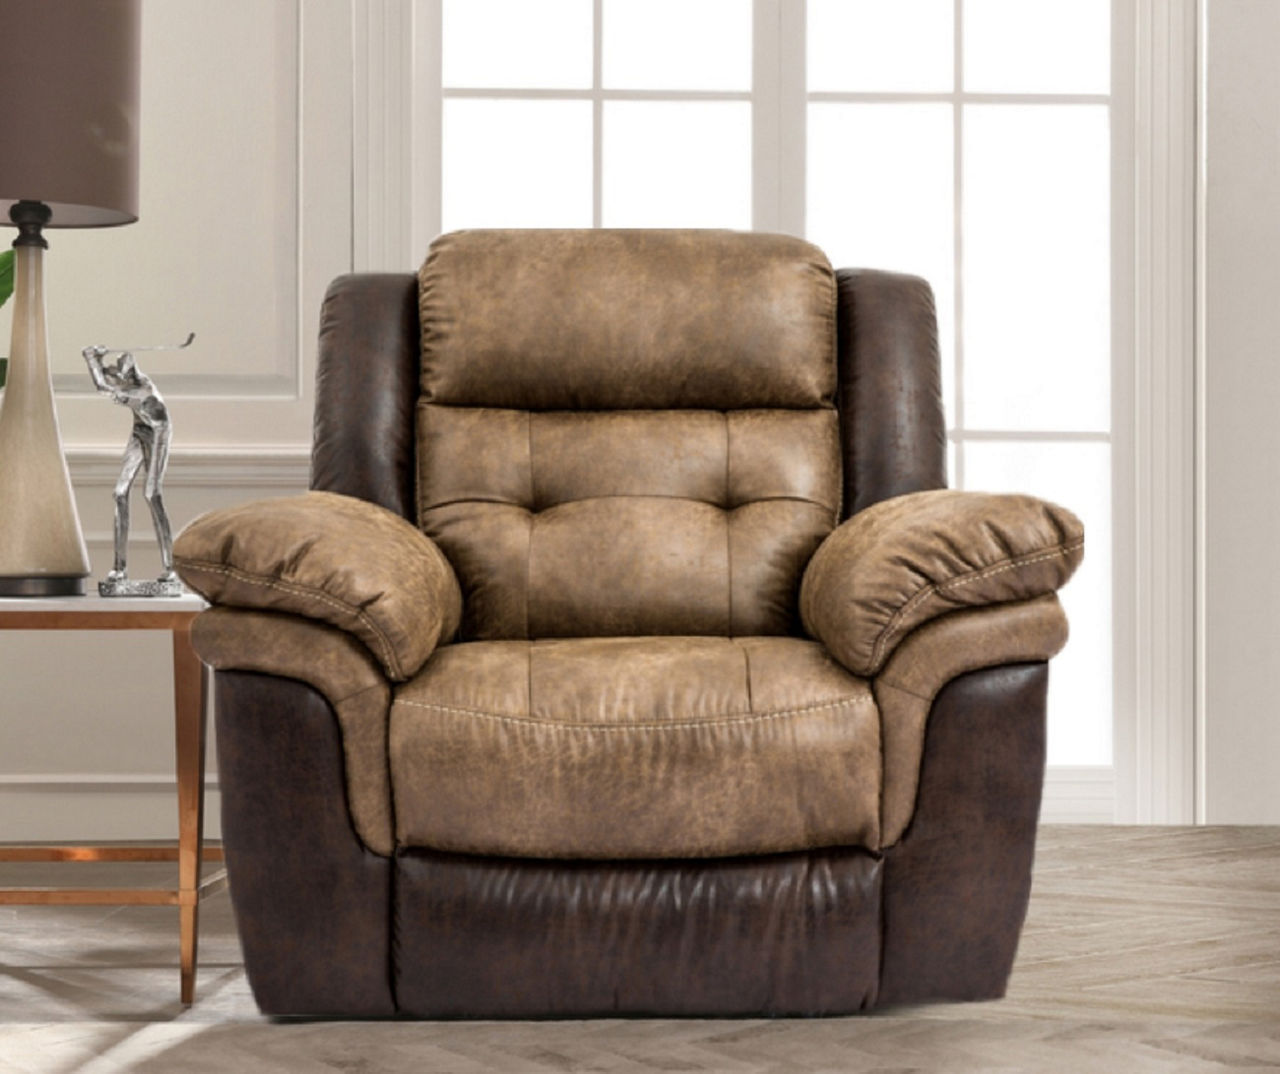 West Valley Brown Leather Glider Recliner - Rooms To Go